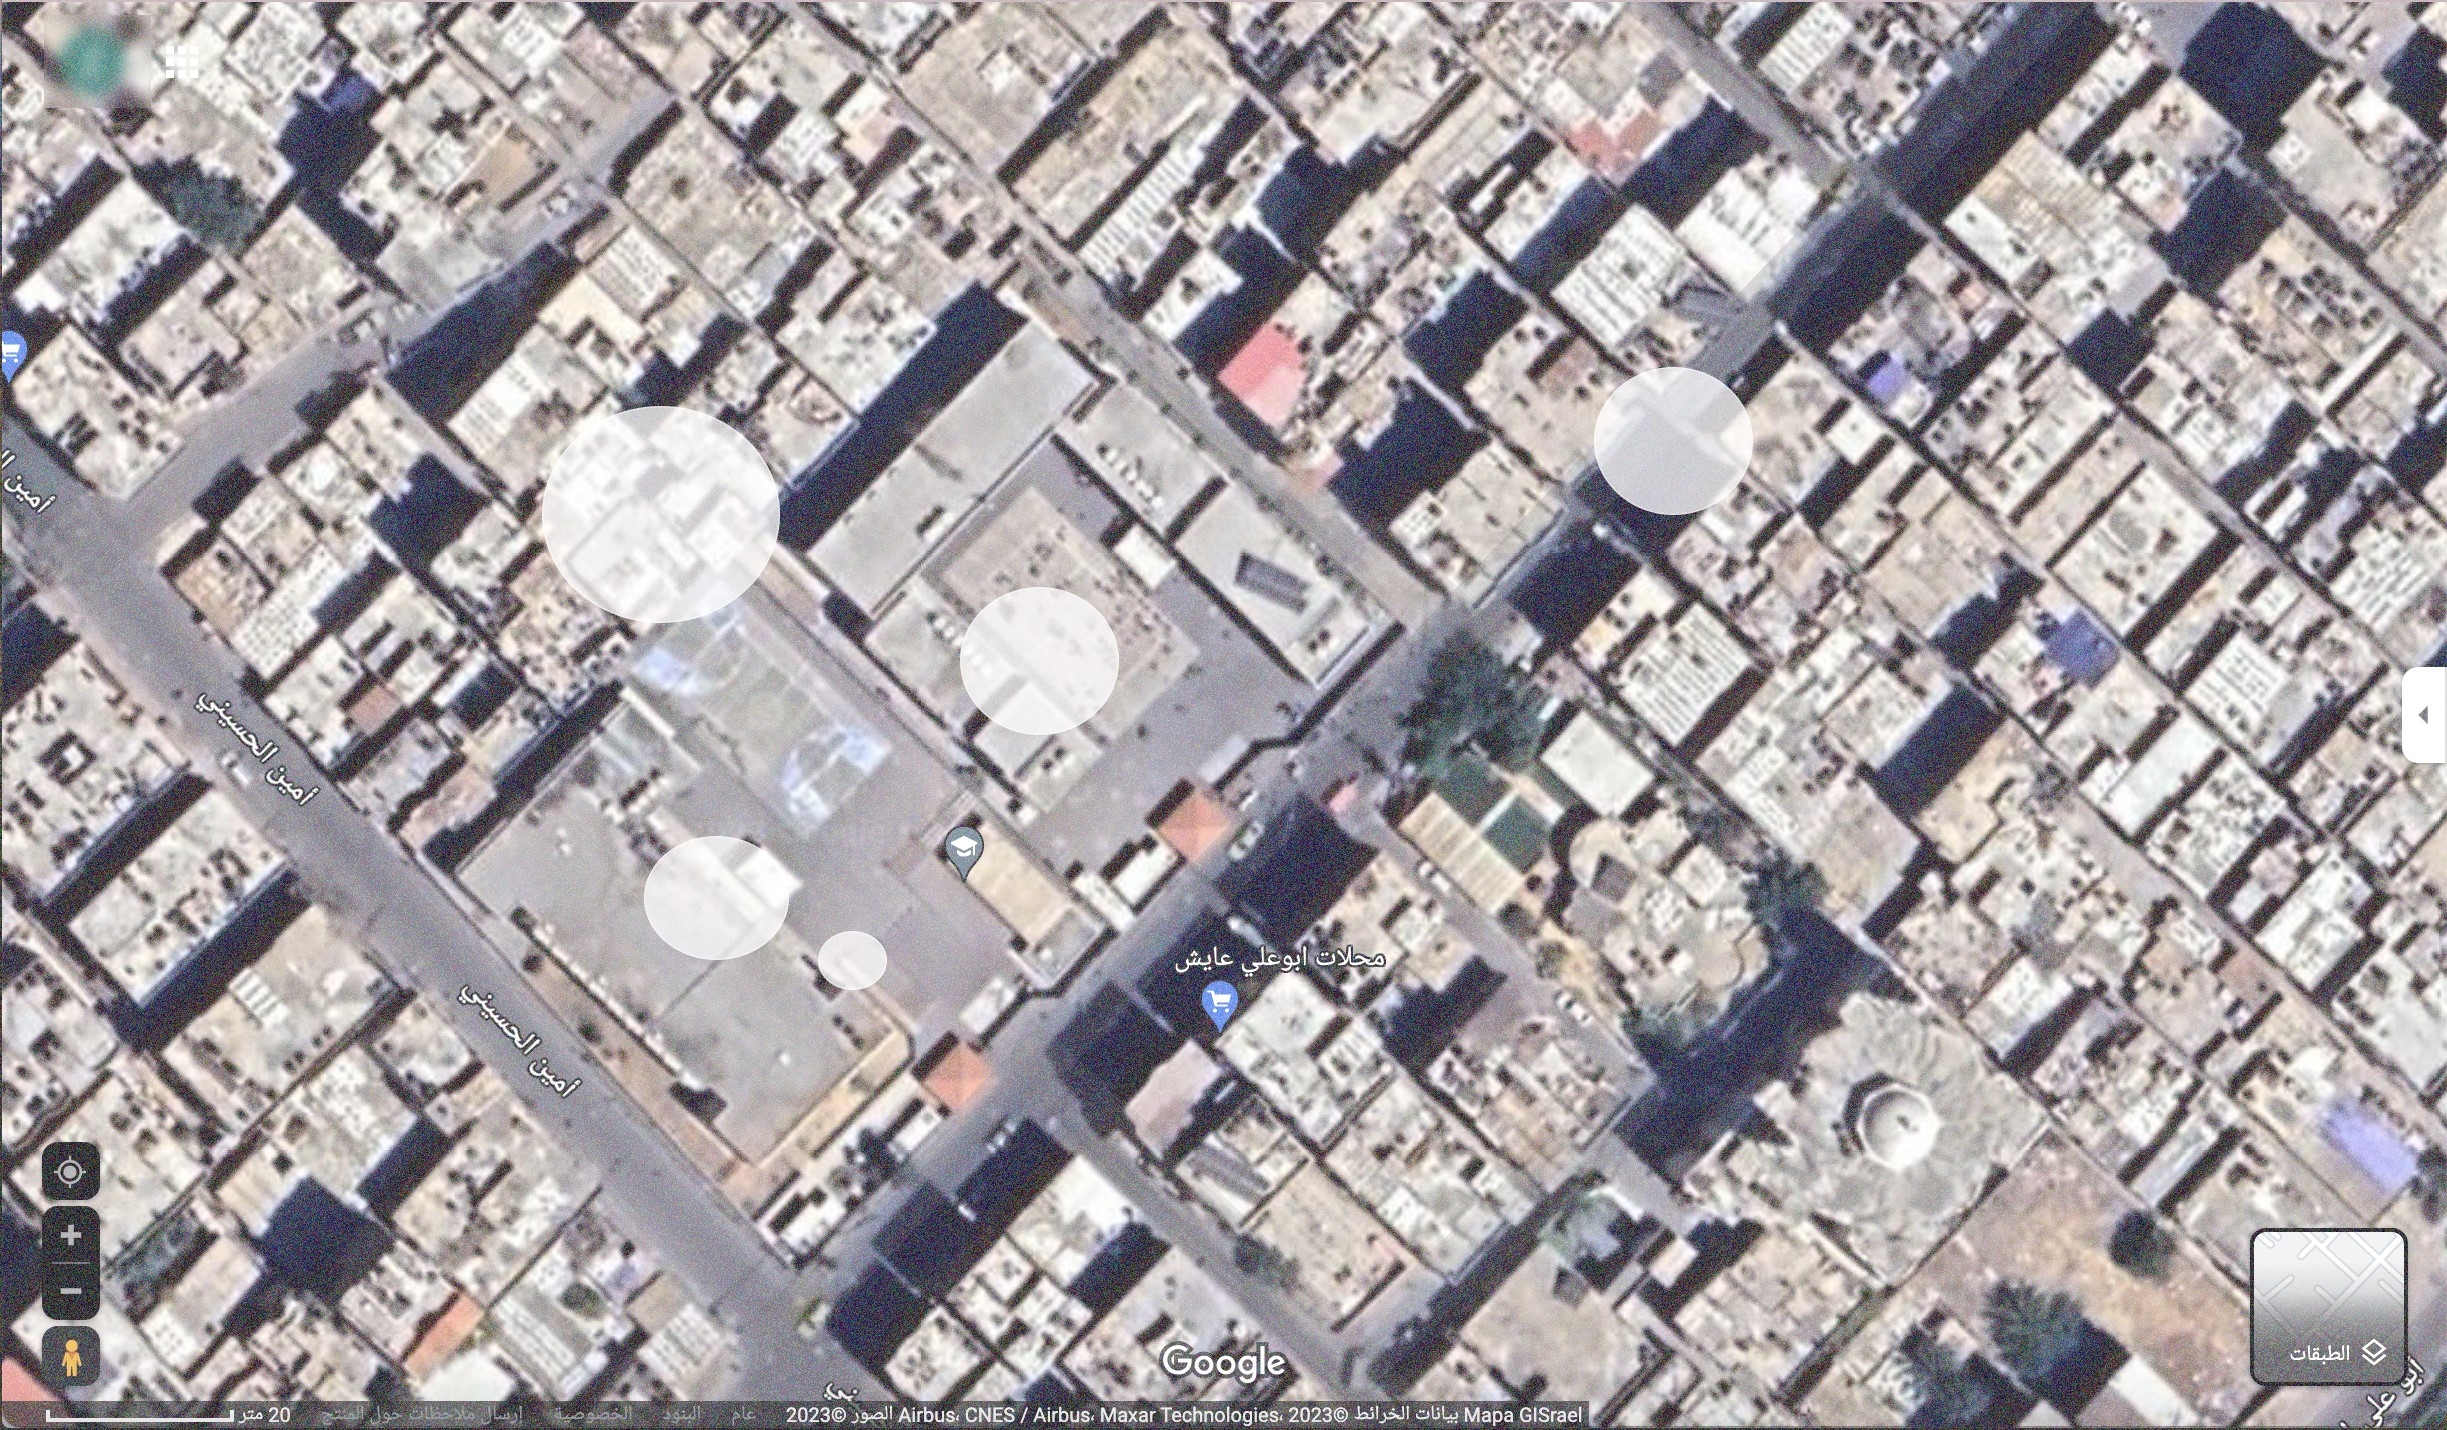 Screenshot of satellite imagery from Google Maps showing a school; white circles denoting where bombs could have fallen.